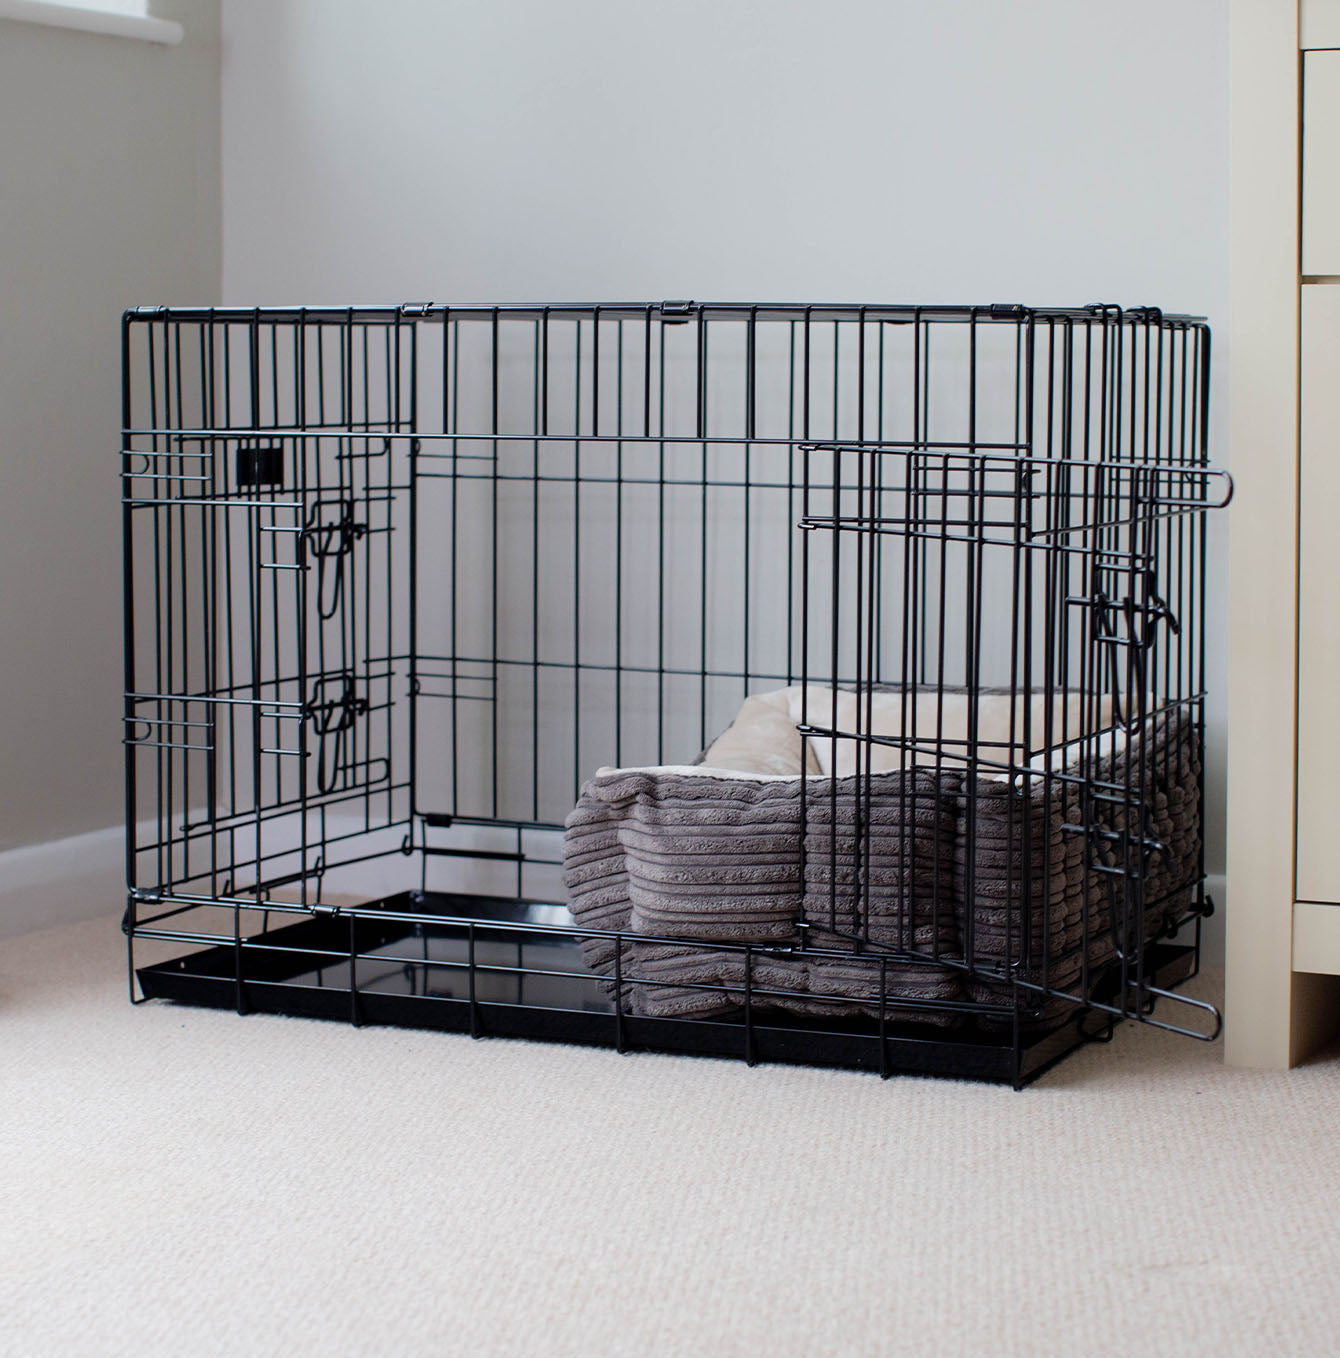 All Natural Dog Crate Bed with Comfy Wool Stuffing — The Best Choice for  Puppy Crate Training